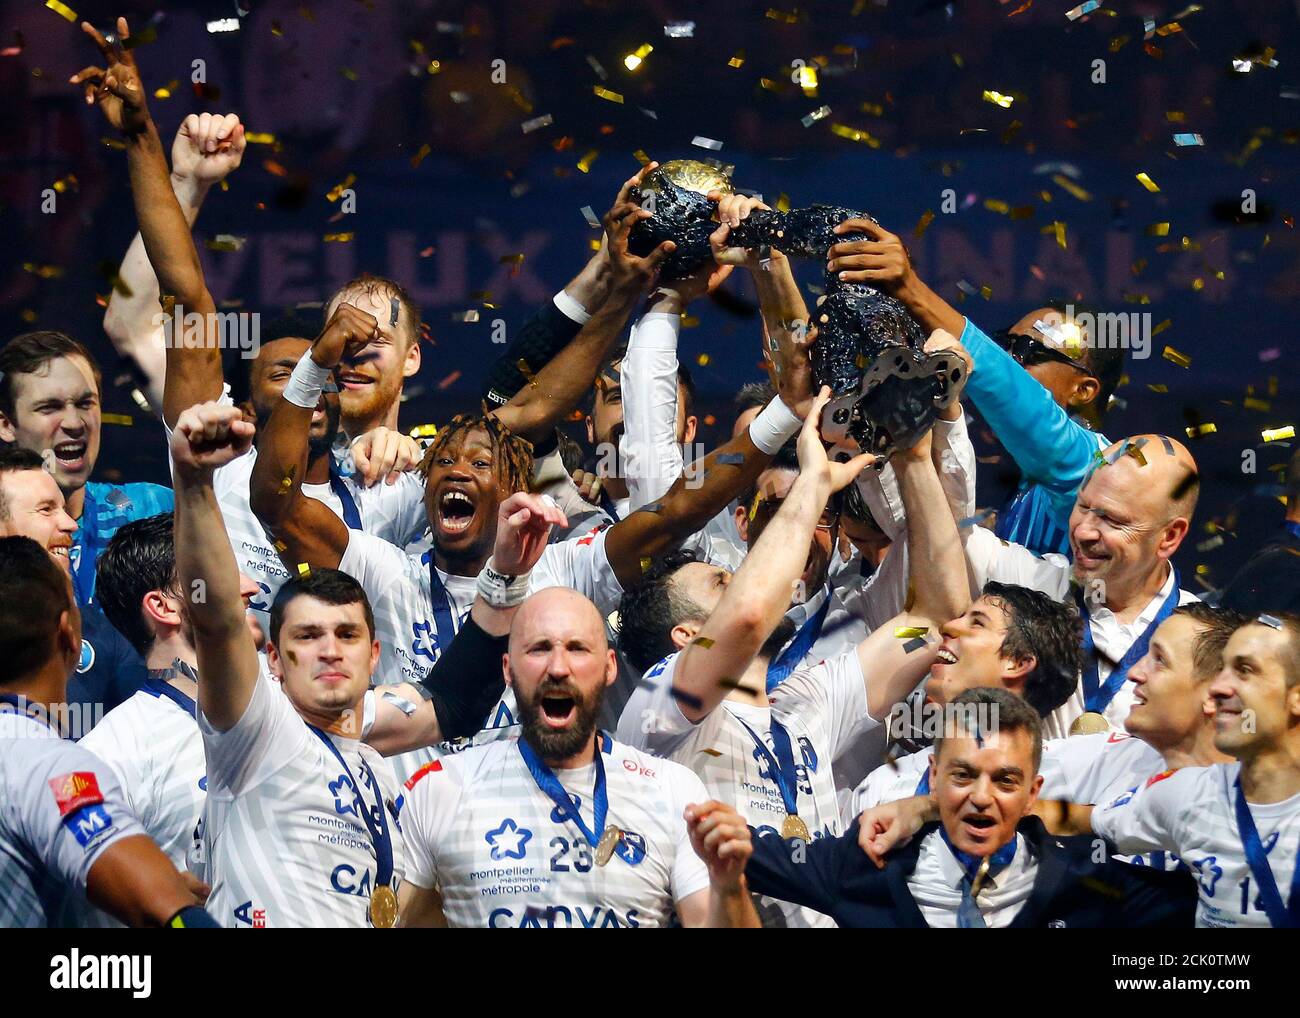 Handball - Men's EHF Champions League Final - HBC Nantes vs Montpellier HB  - Lanxess Arena, Cologne, Germany - May 27, 2018. Montpellier HB players  celebrate with the trophy. REUTERS/Thilo Schmuelgen Stock Photo - Alamy